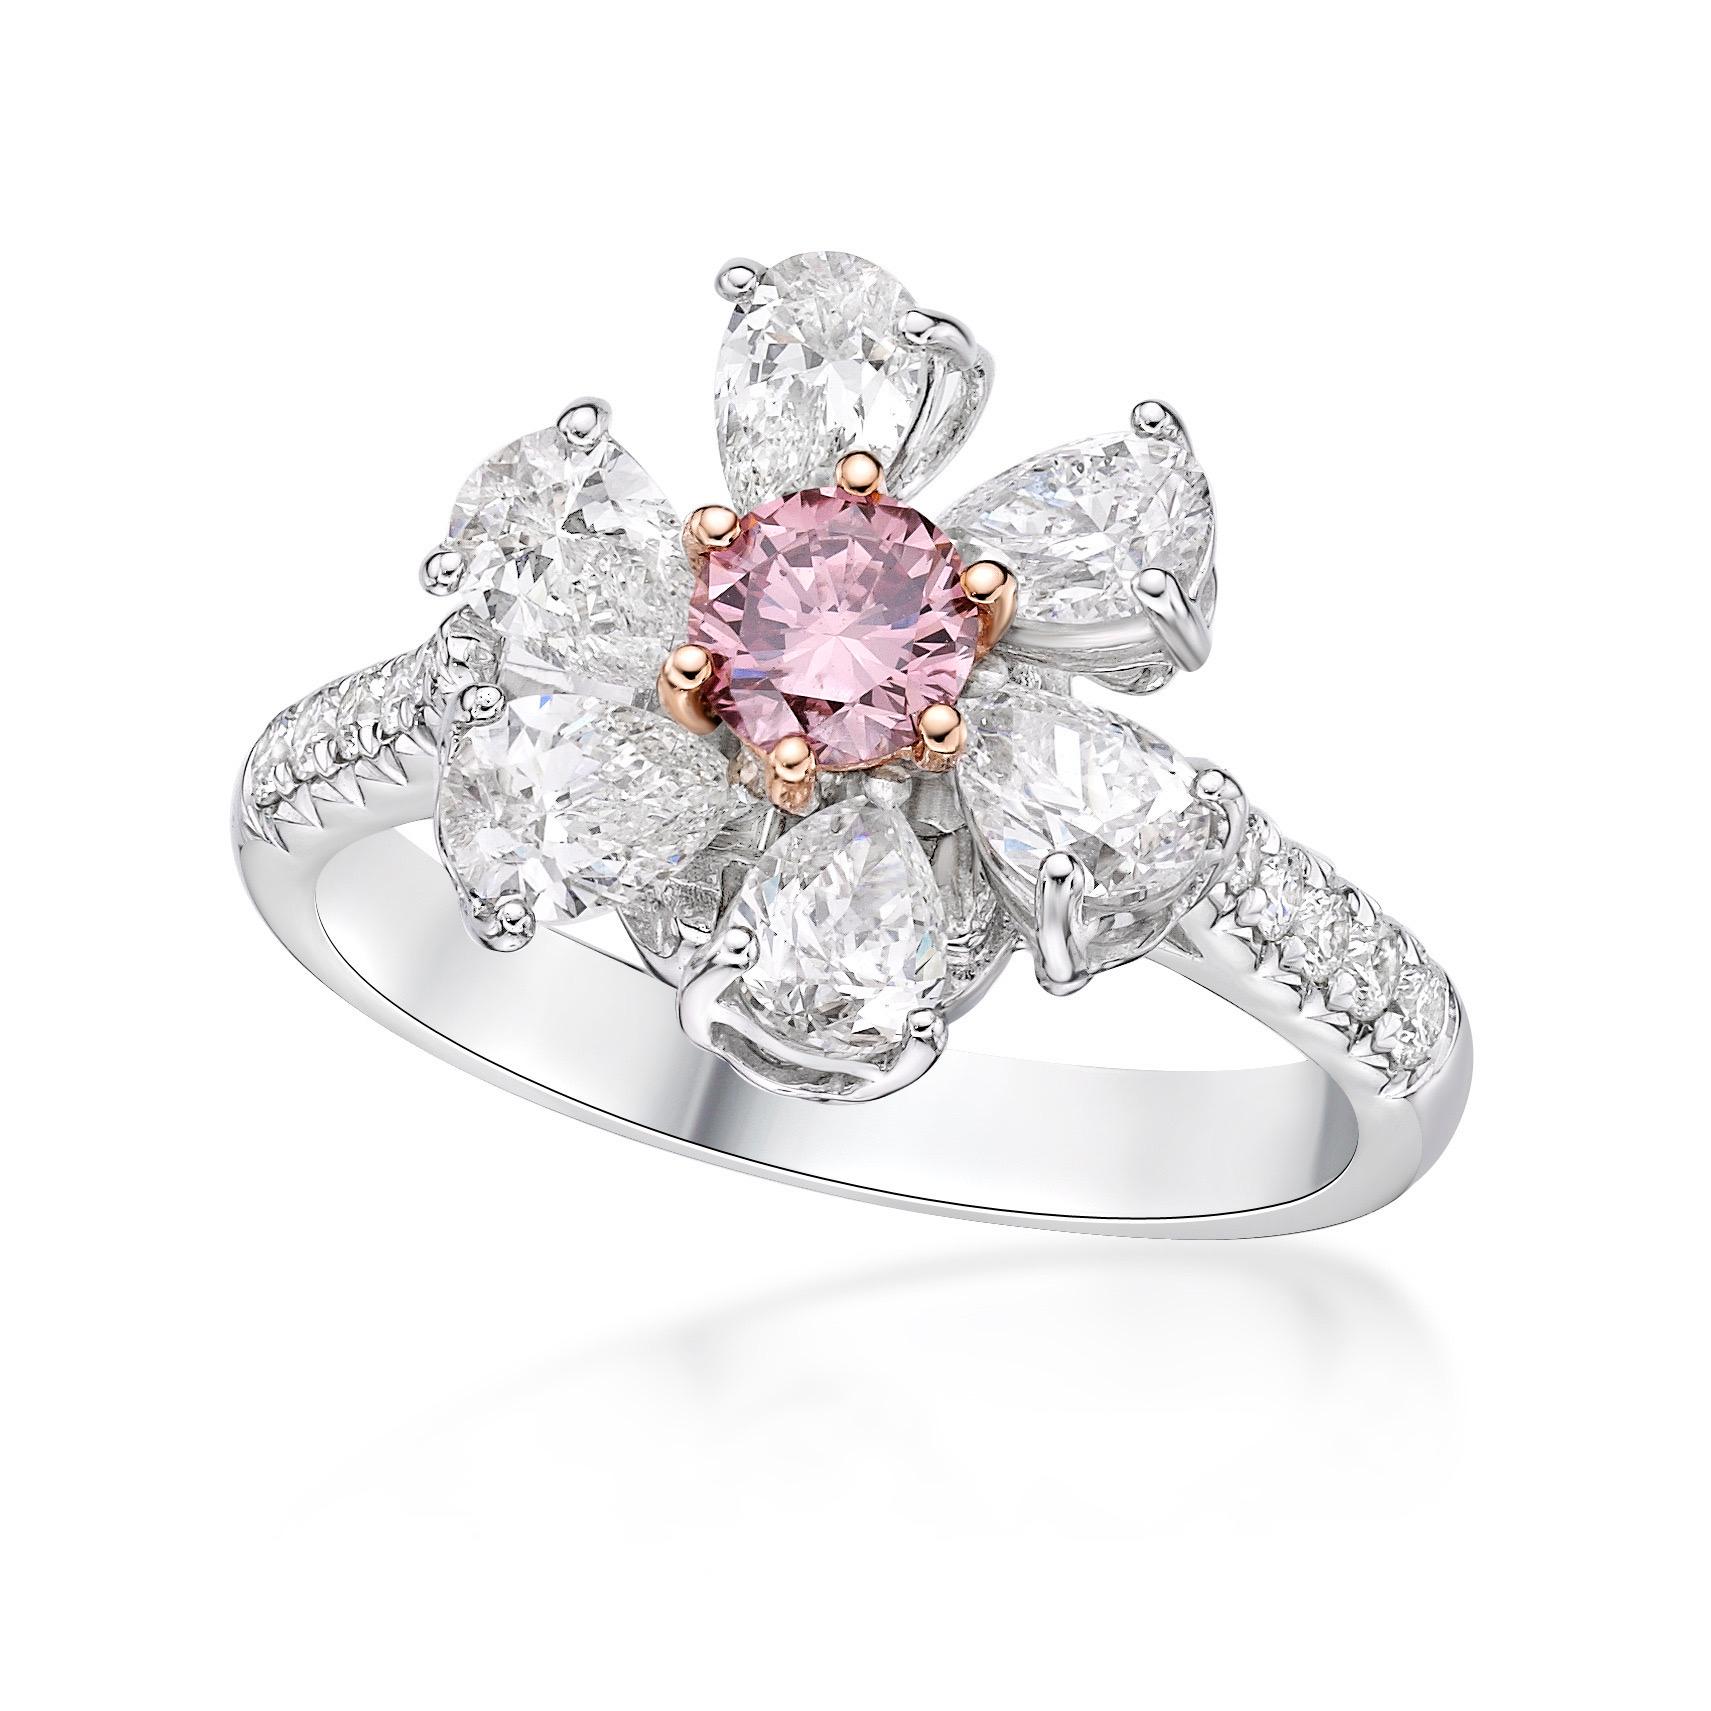 6 pear shape diamonds 1.45ct
Center: natural fancy pink diamond .35ct 
12 small diamonds totaling .22ct

From The Museum Vault at Emilio Jewelry Located on New York's iconic Fifth Avenue,
Showcasing a very special and rare Gia certified natural pink